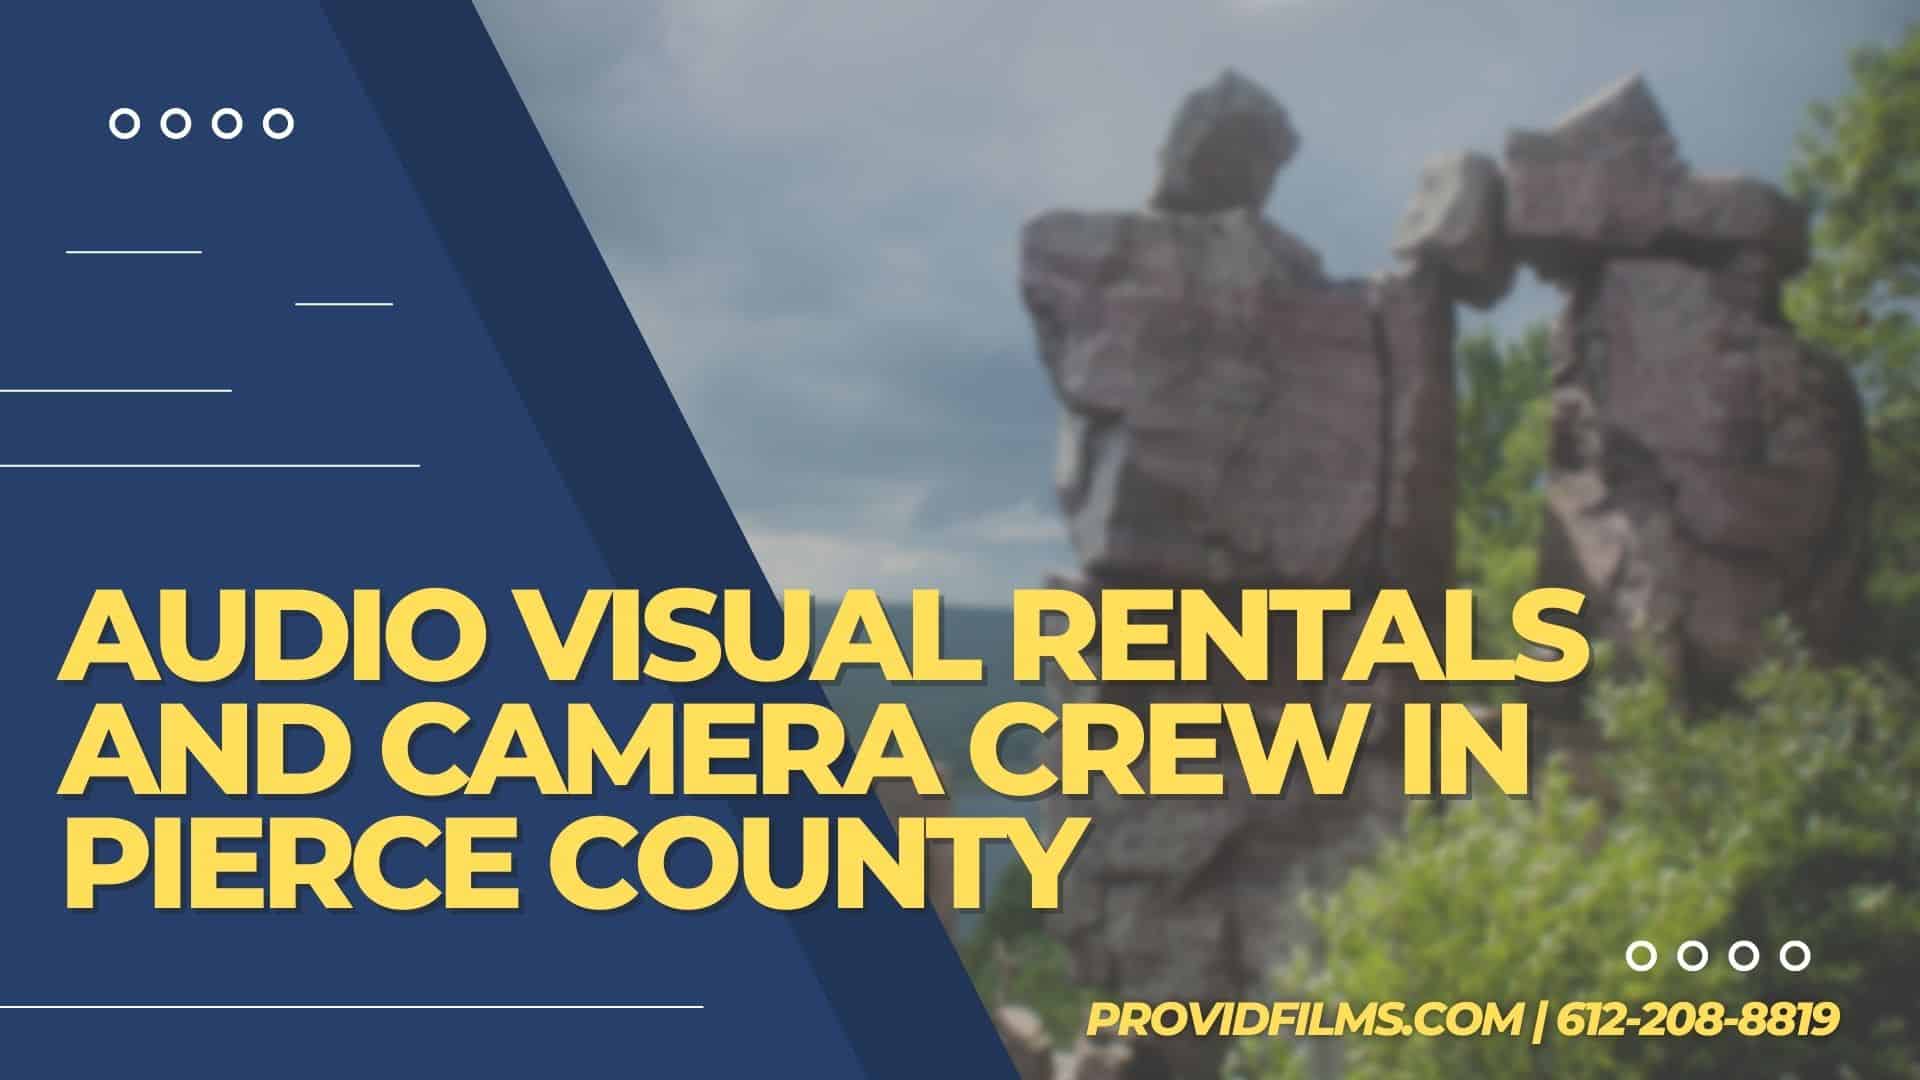 Graphic with a video camera crew with the text saying "AV Rental and Camera Crew in Pierce County"